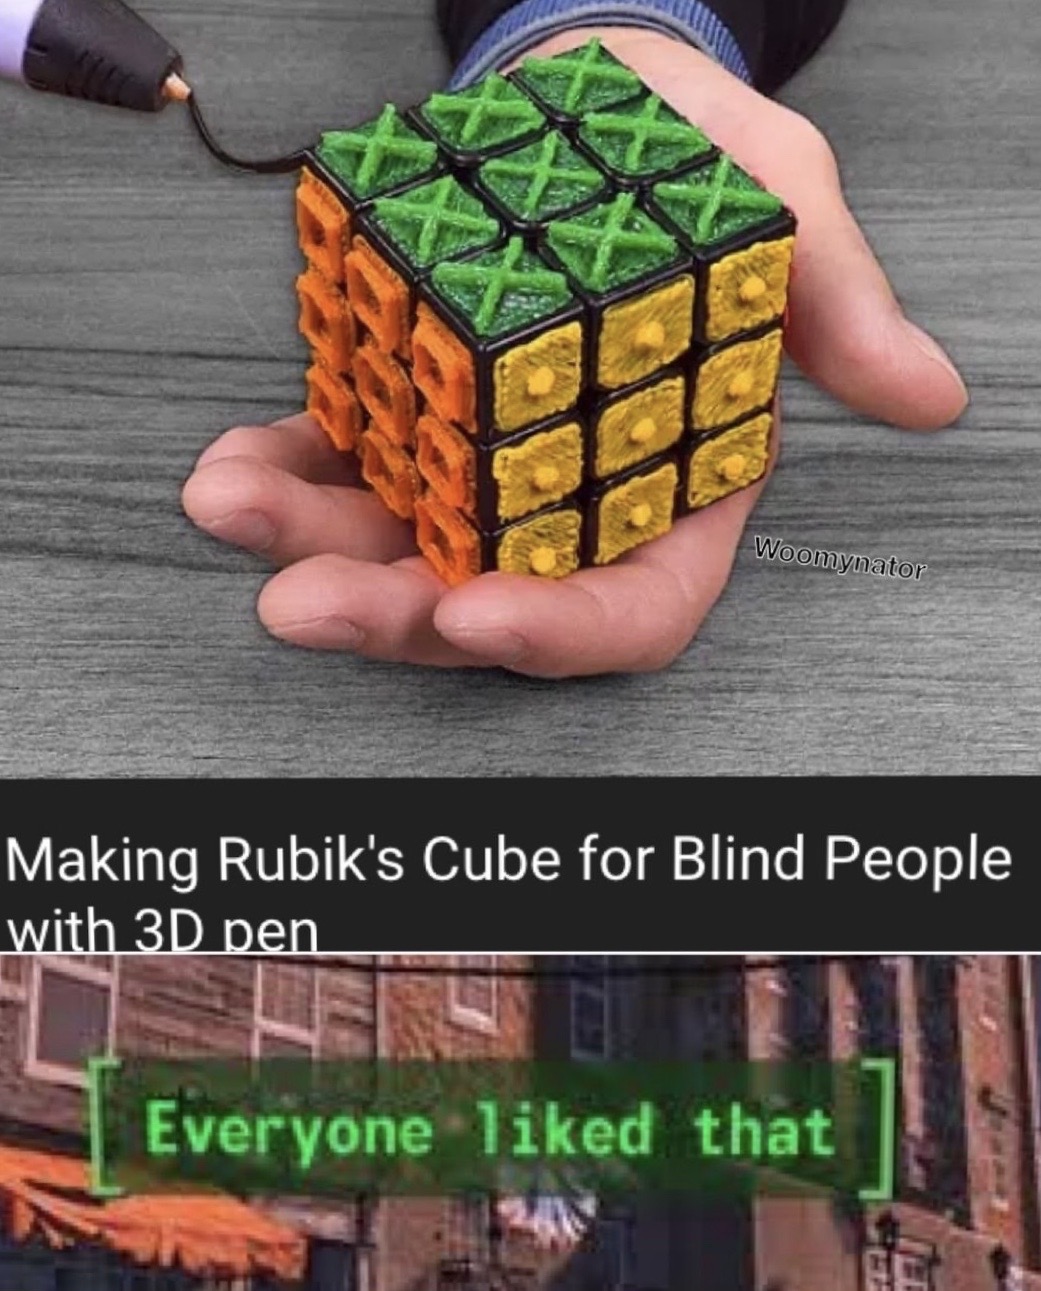 rubik's cube - Woomynator Making Rubik's Cube for Blind People with 3D pen Everyone d that